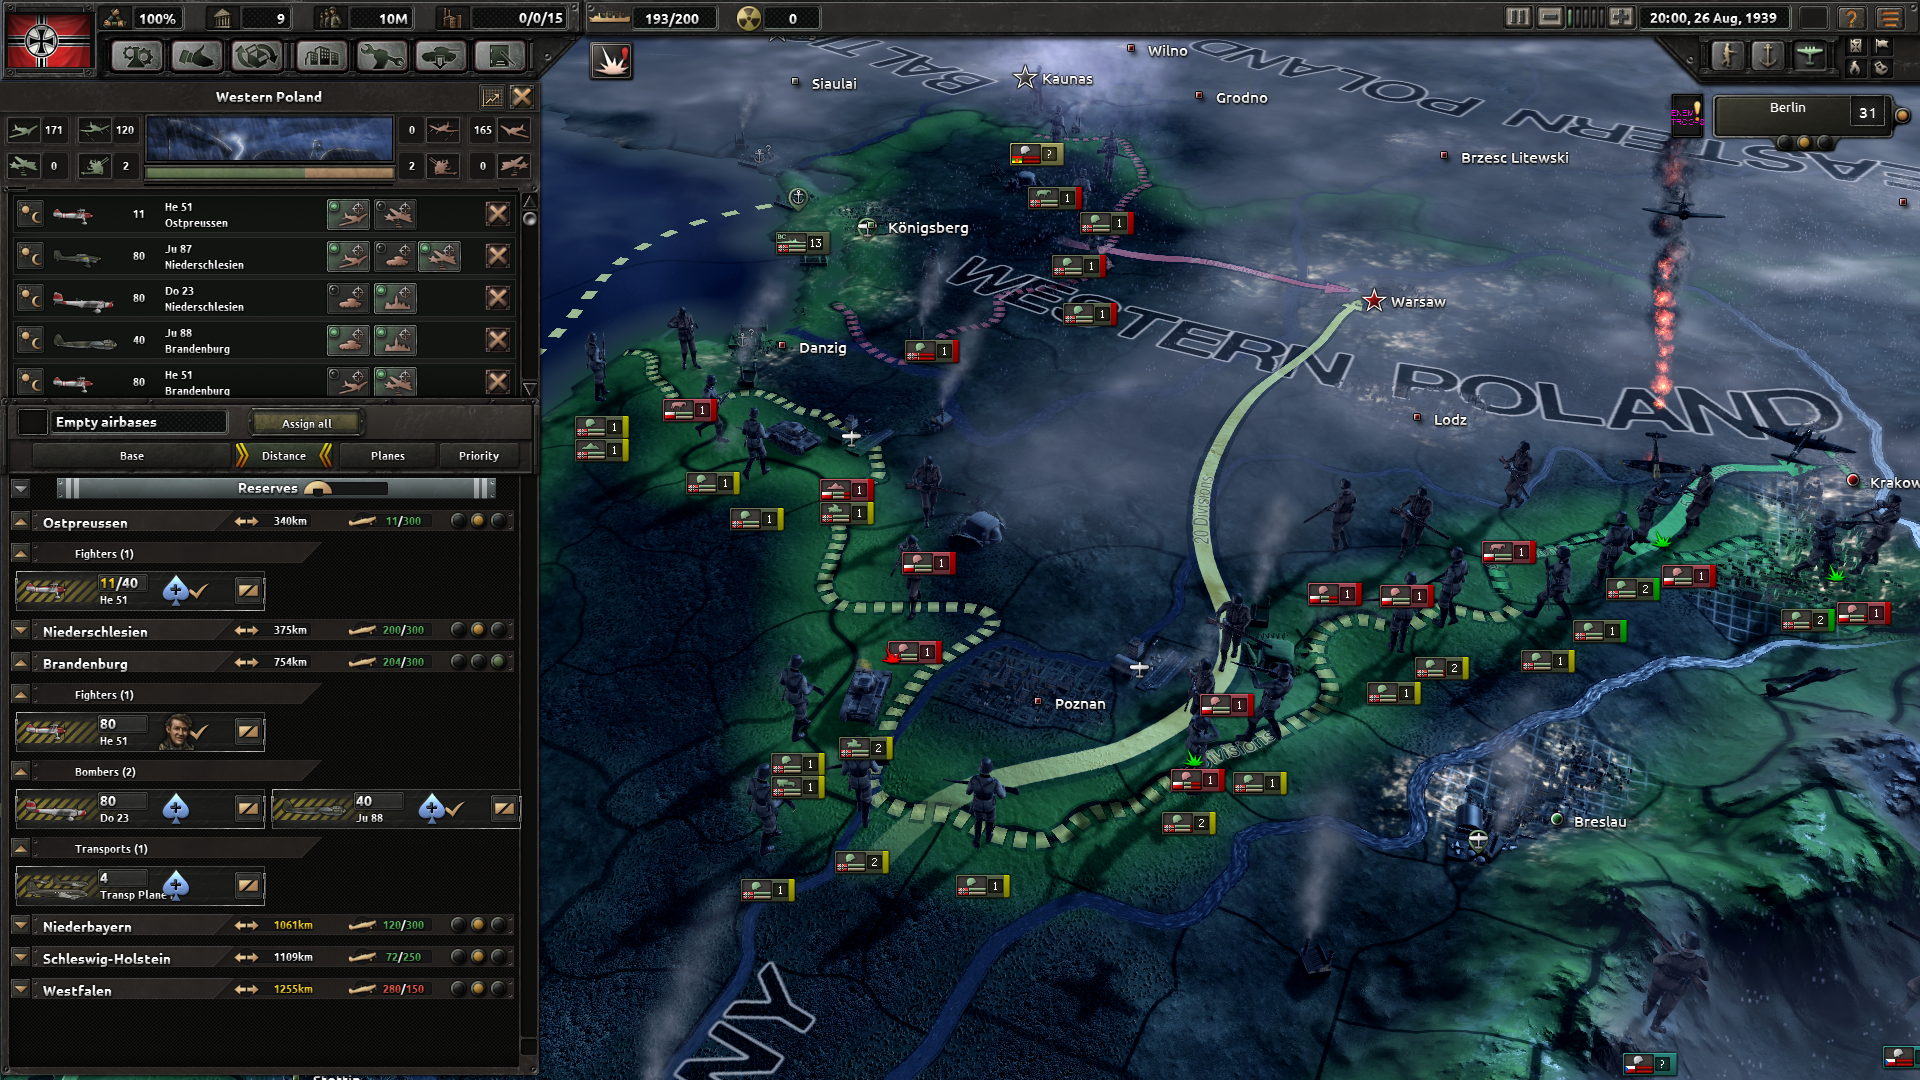 hearts of iron iv torrent 1.3.1 update